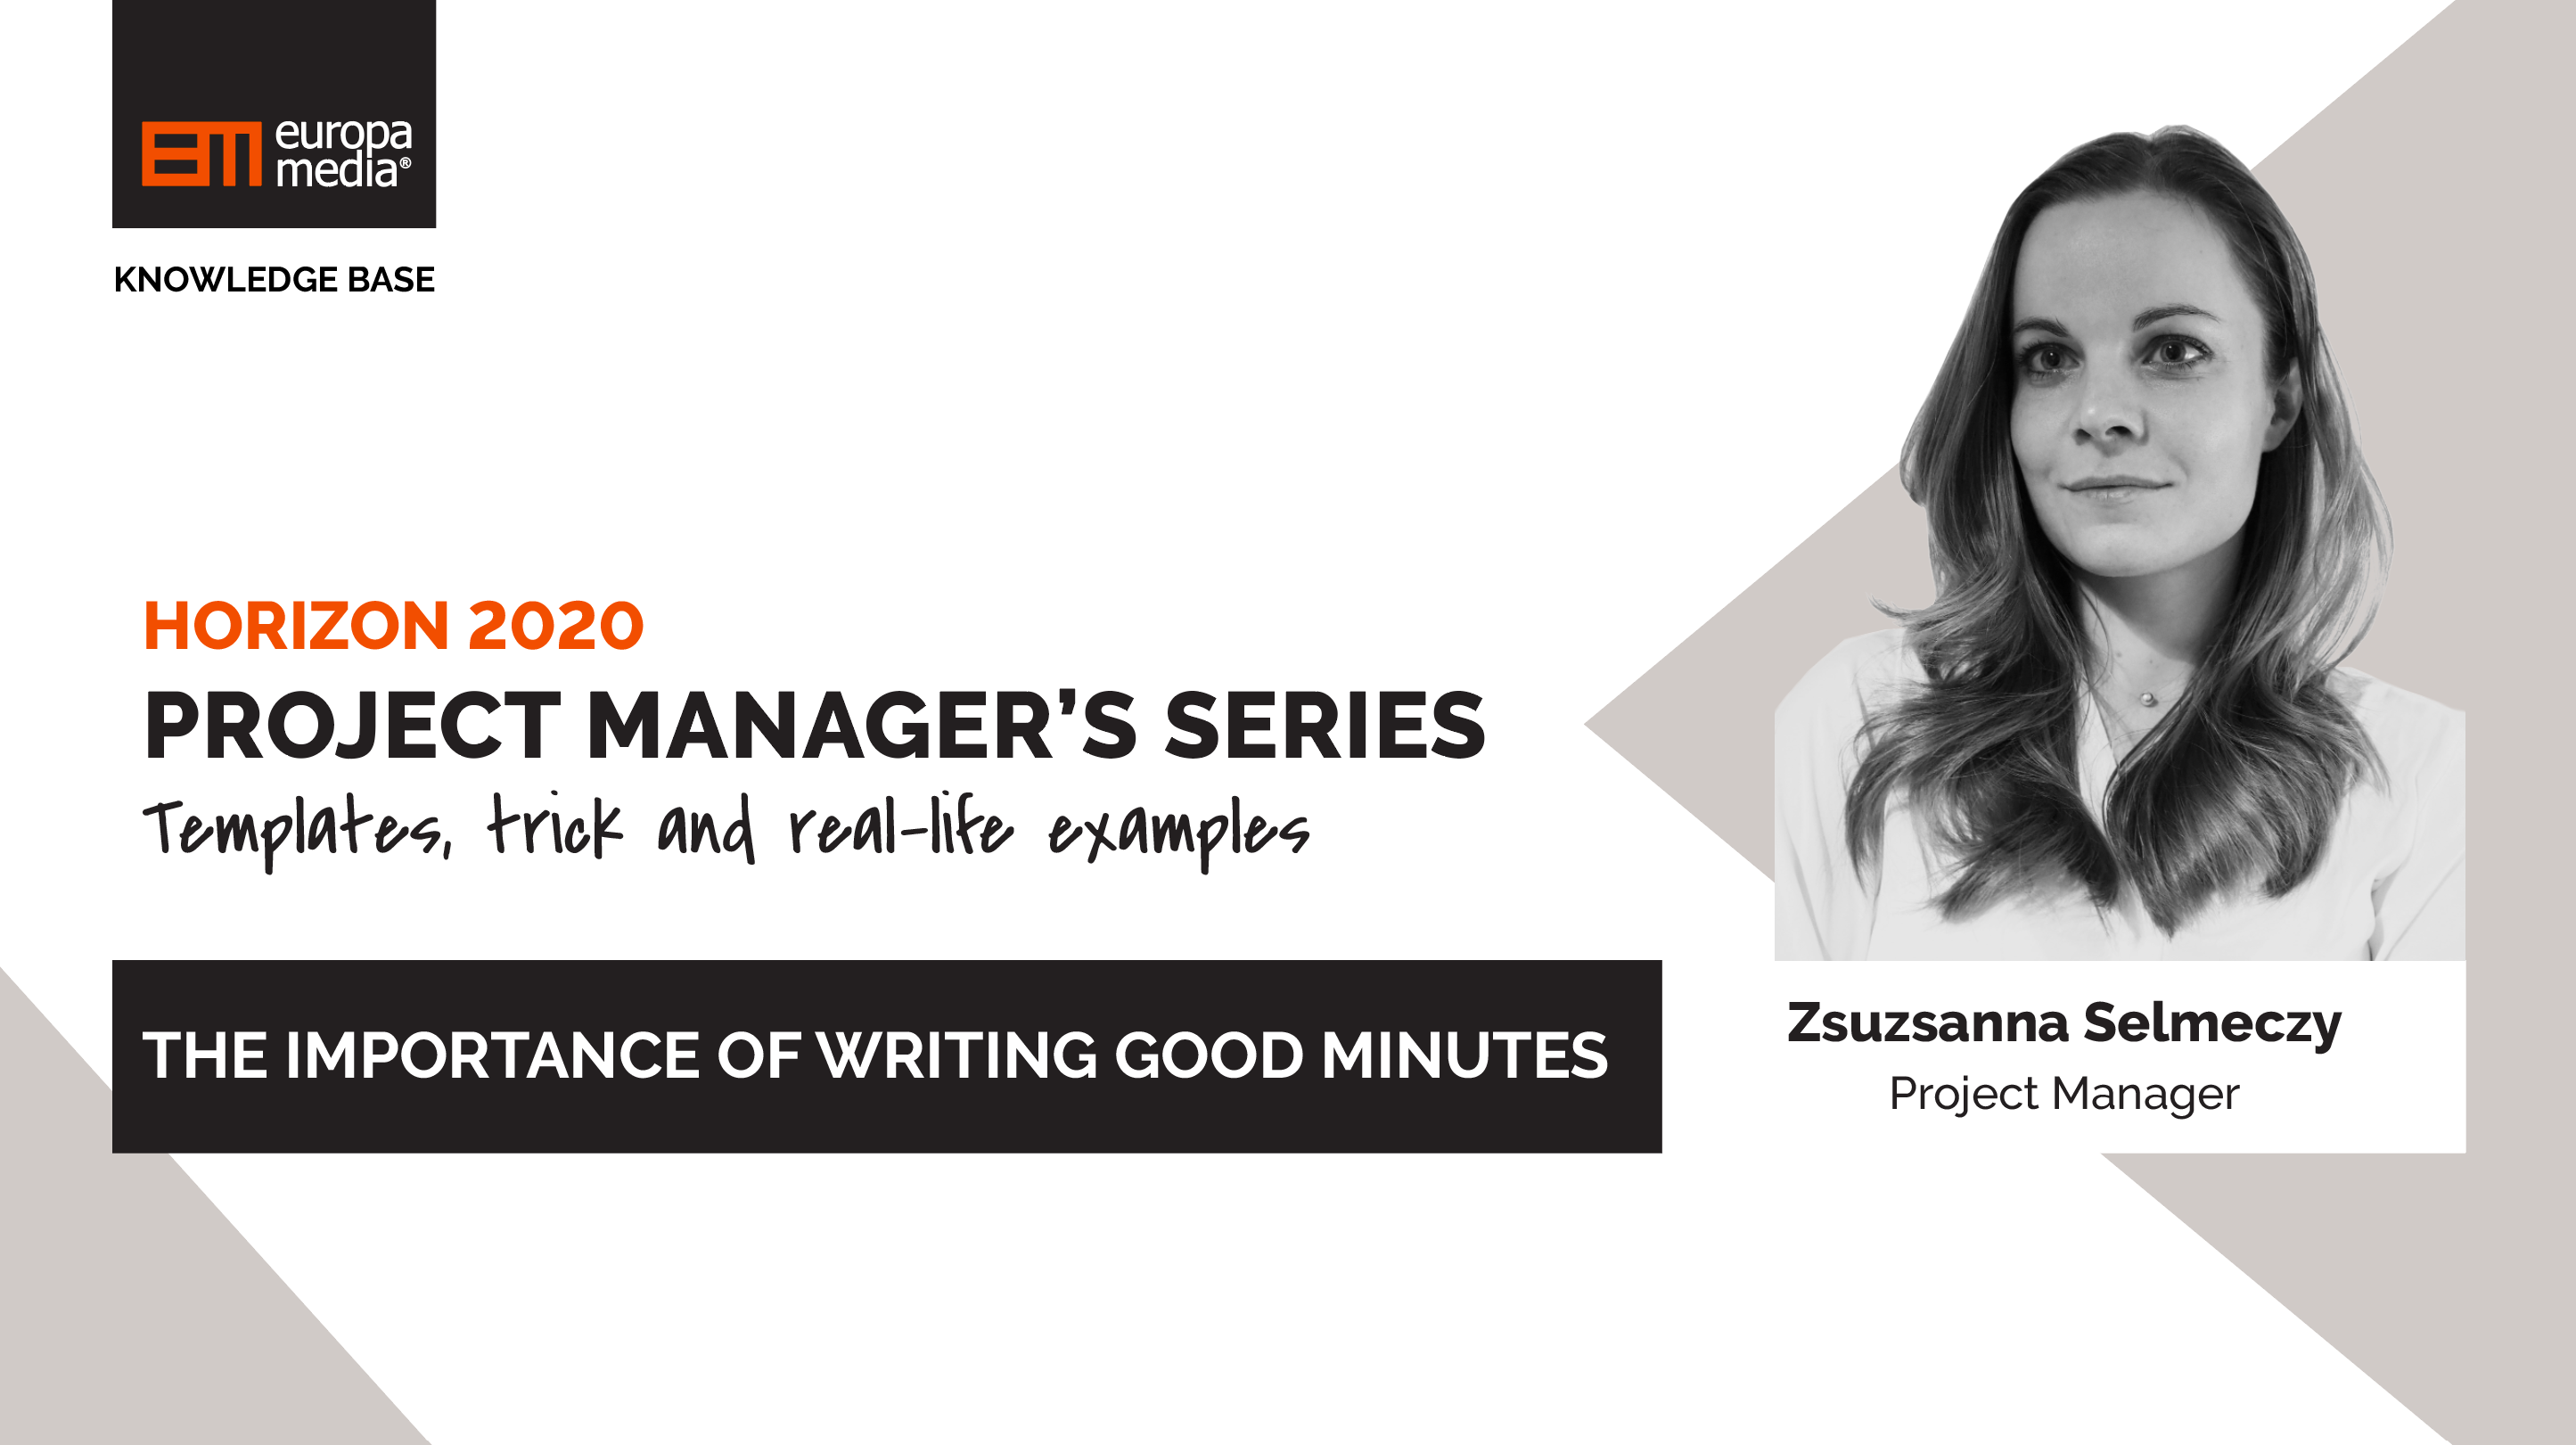 The importance of writing good minutes